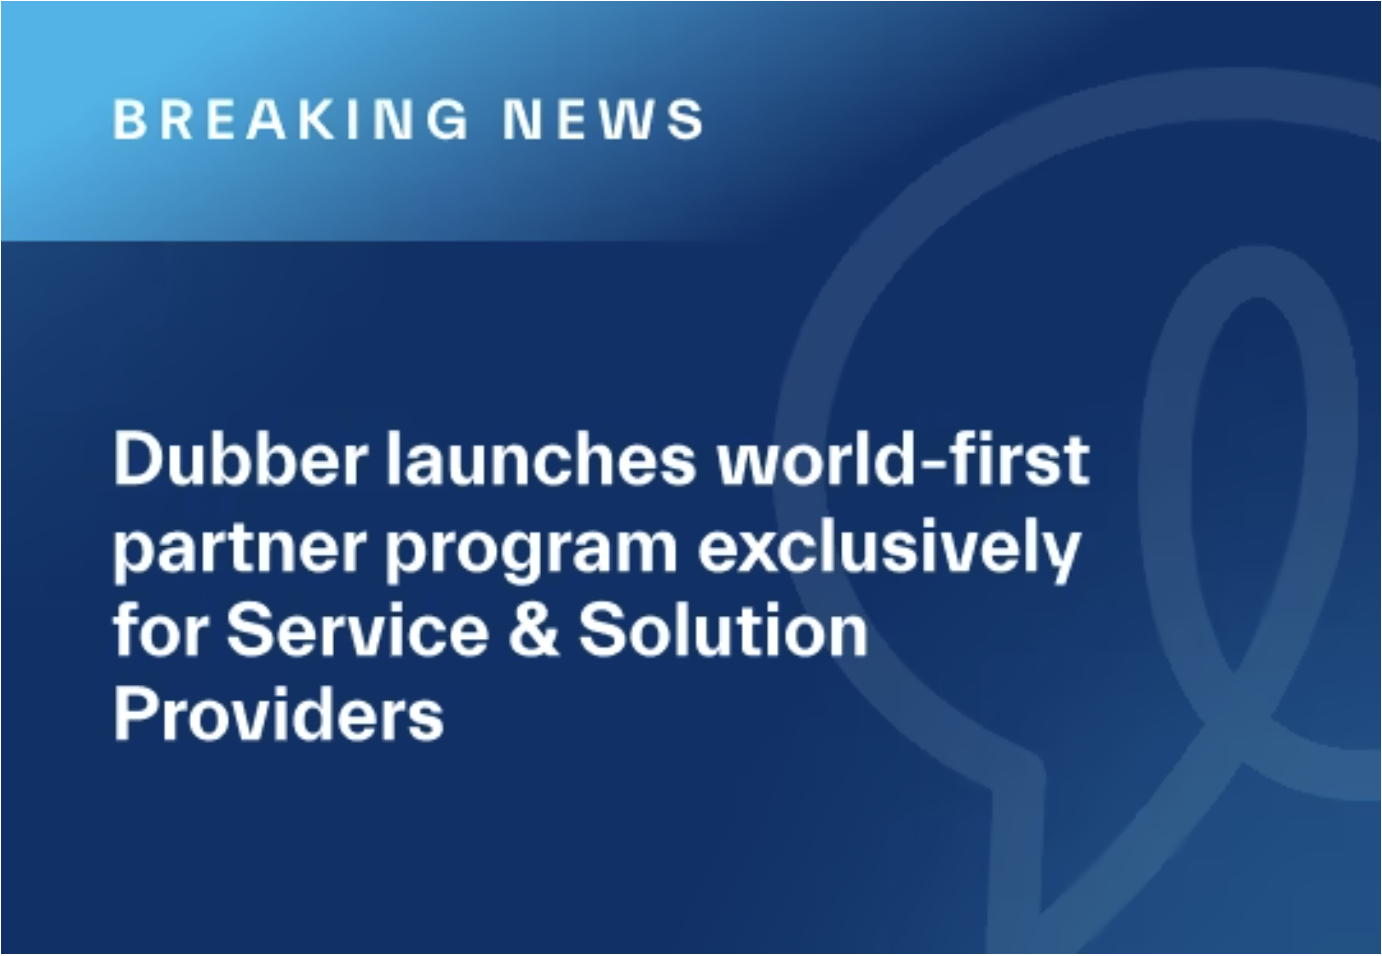 Dubber launches world-first partner program exclusively for Service & Solution Providers